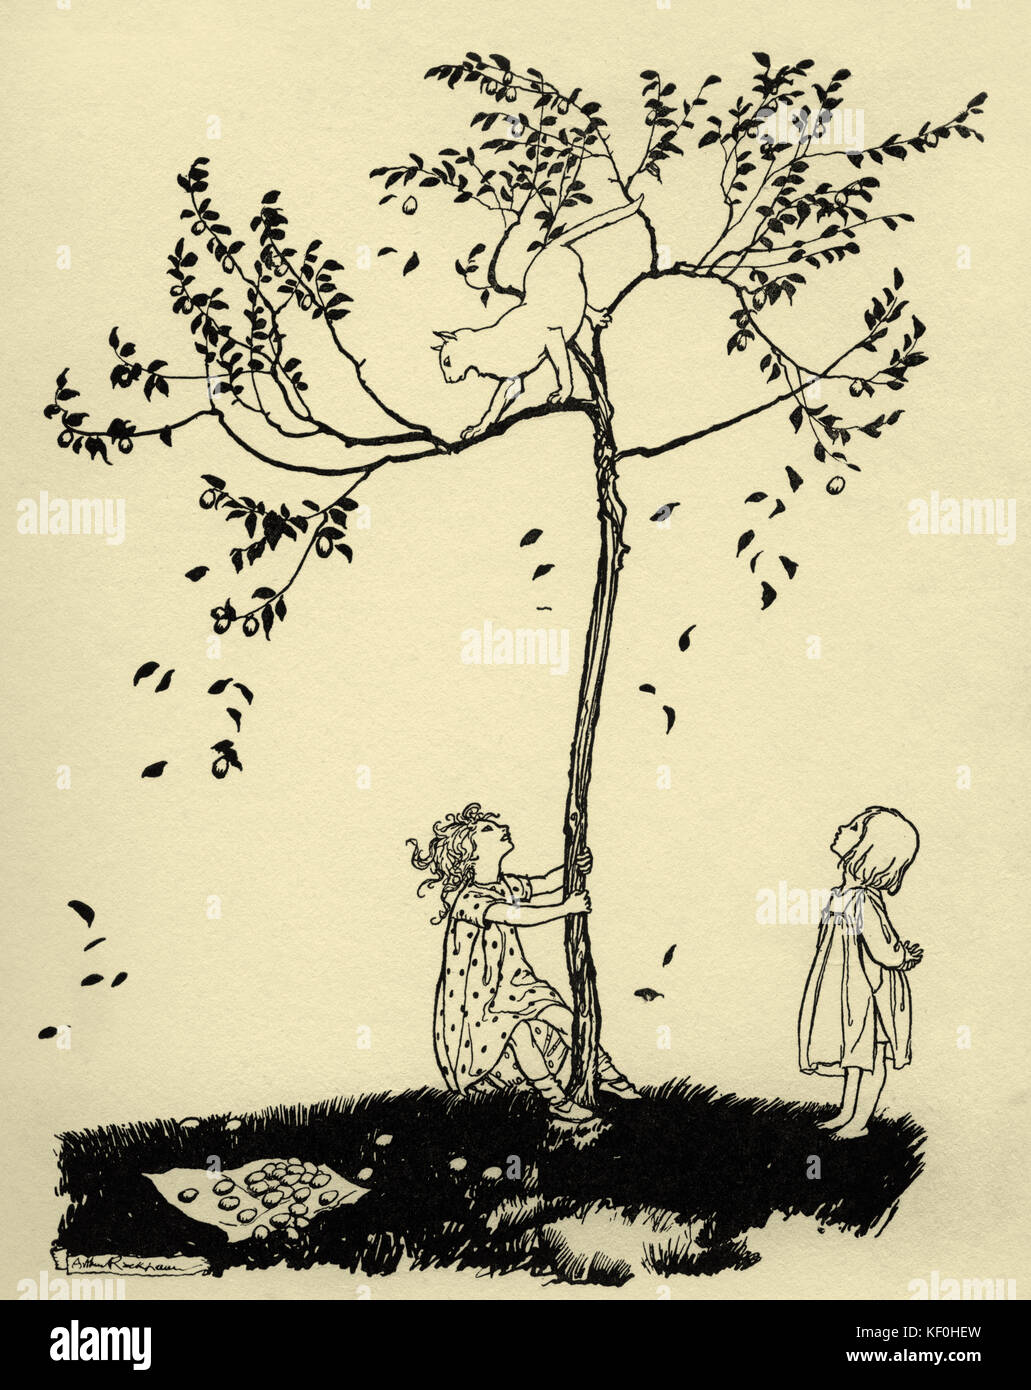 Diddlety, diddlety, dumpty; / The cat ran up the plum -tree'. Nursery  rhyme, illustration by Arthur Rackham. English book illustrator 19  September 1867 – 6 September 1939. Cat stuck up a tree